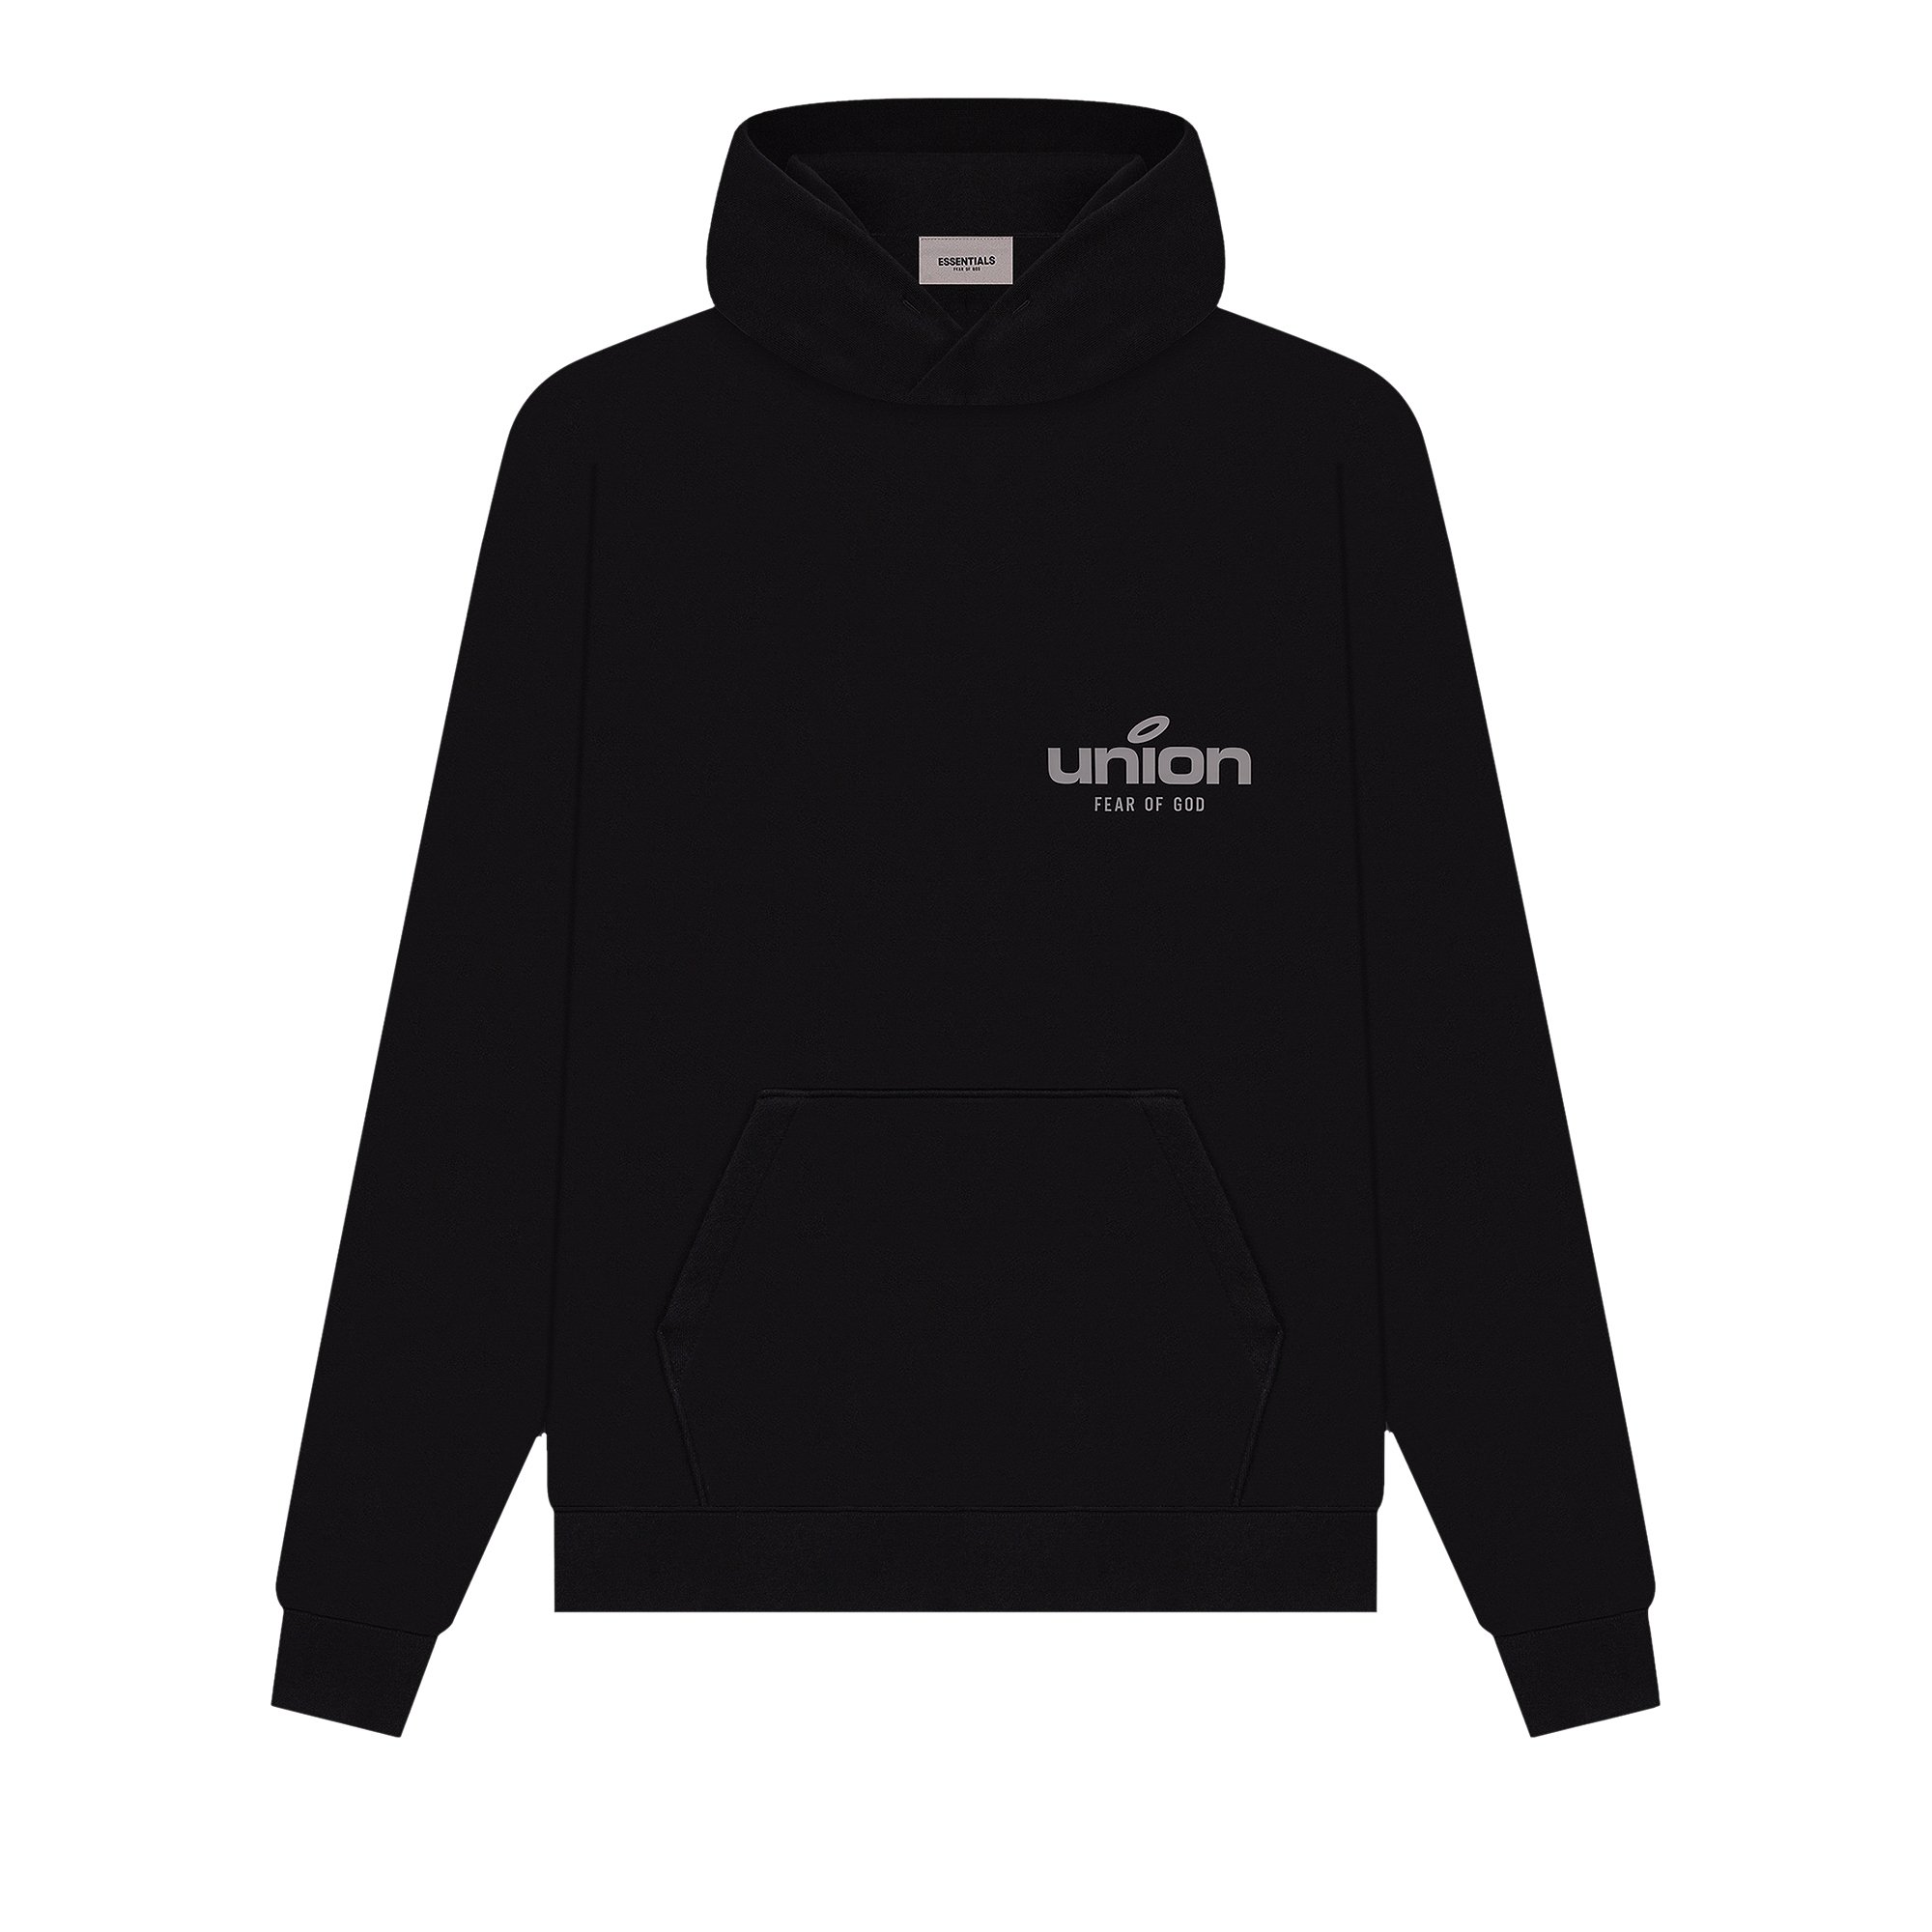 Fear of God Essentials x Union Vintage Pullover Hoodie 'Black' | GOAT